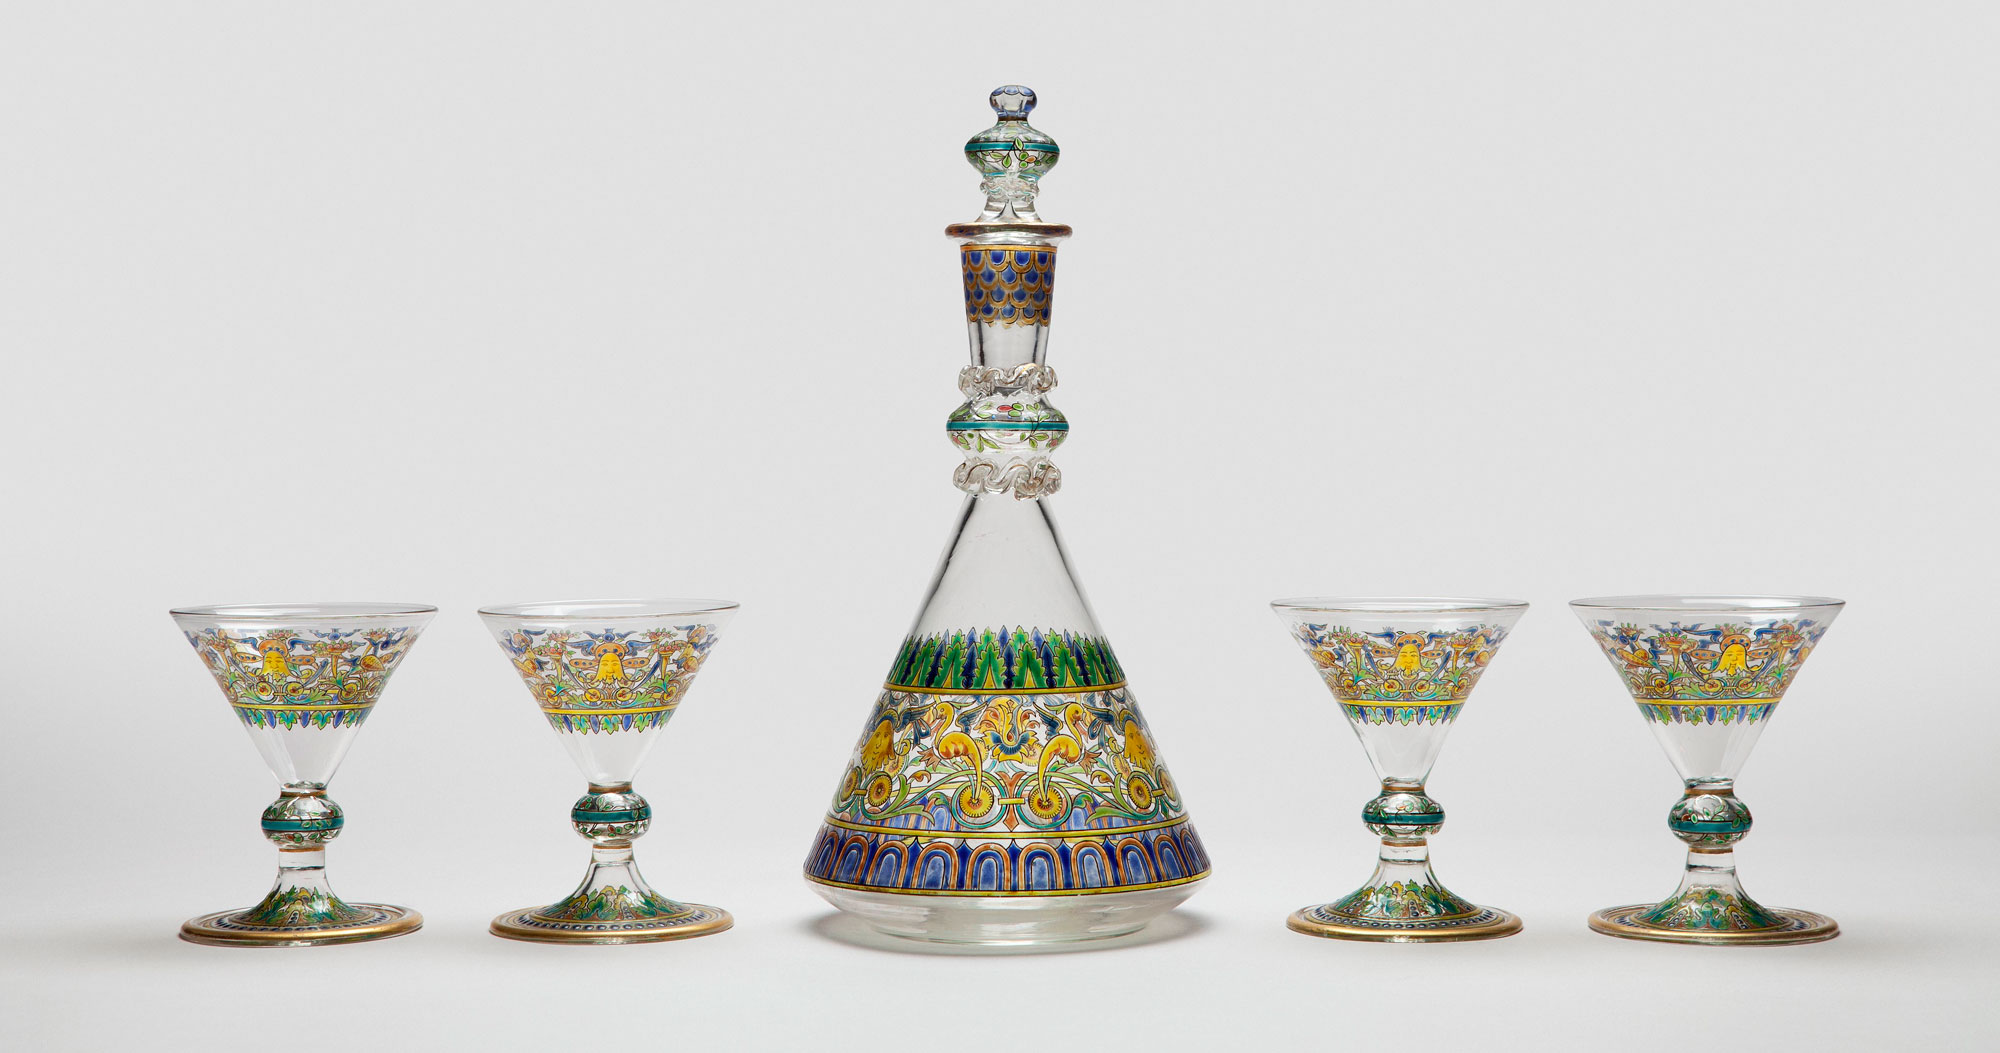 The exhibition "Masterpieces of the Russian Imperial Glass Factory of the XIX – early XX century from the collection of the State Historical Museum"